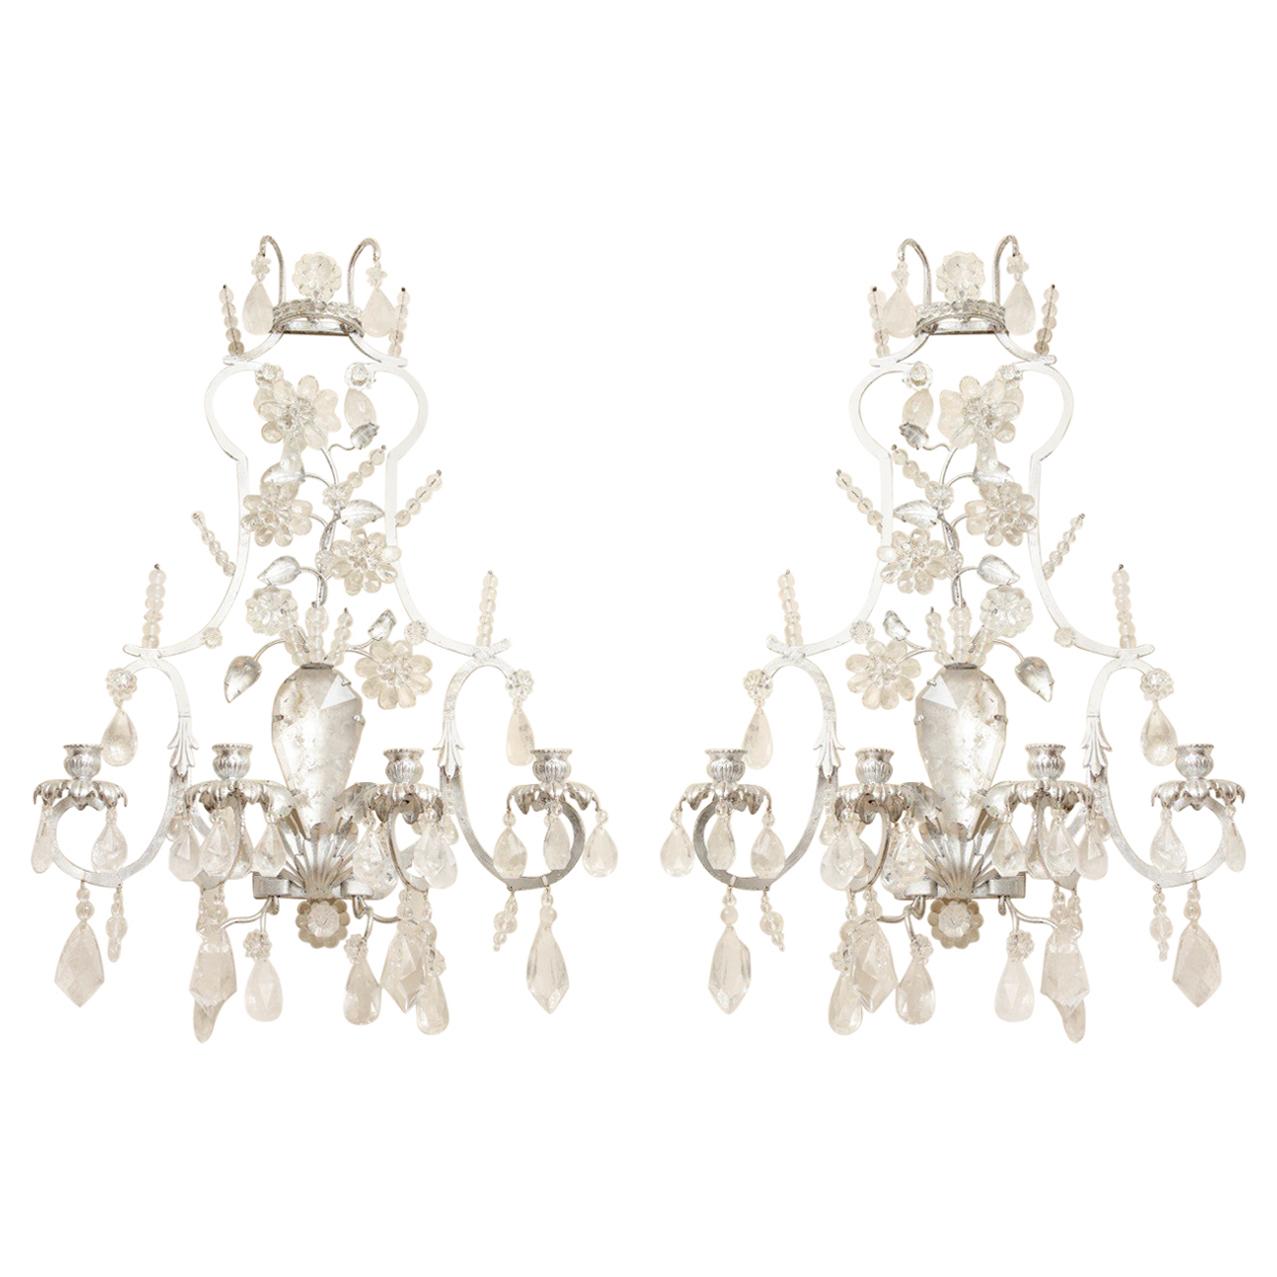 Pair of New Four-Light Rock Crystal Sconces